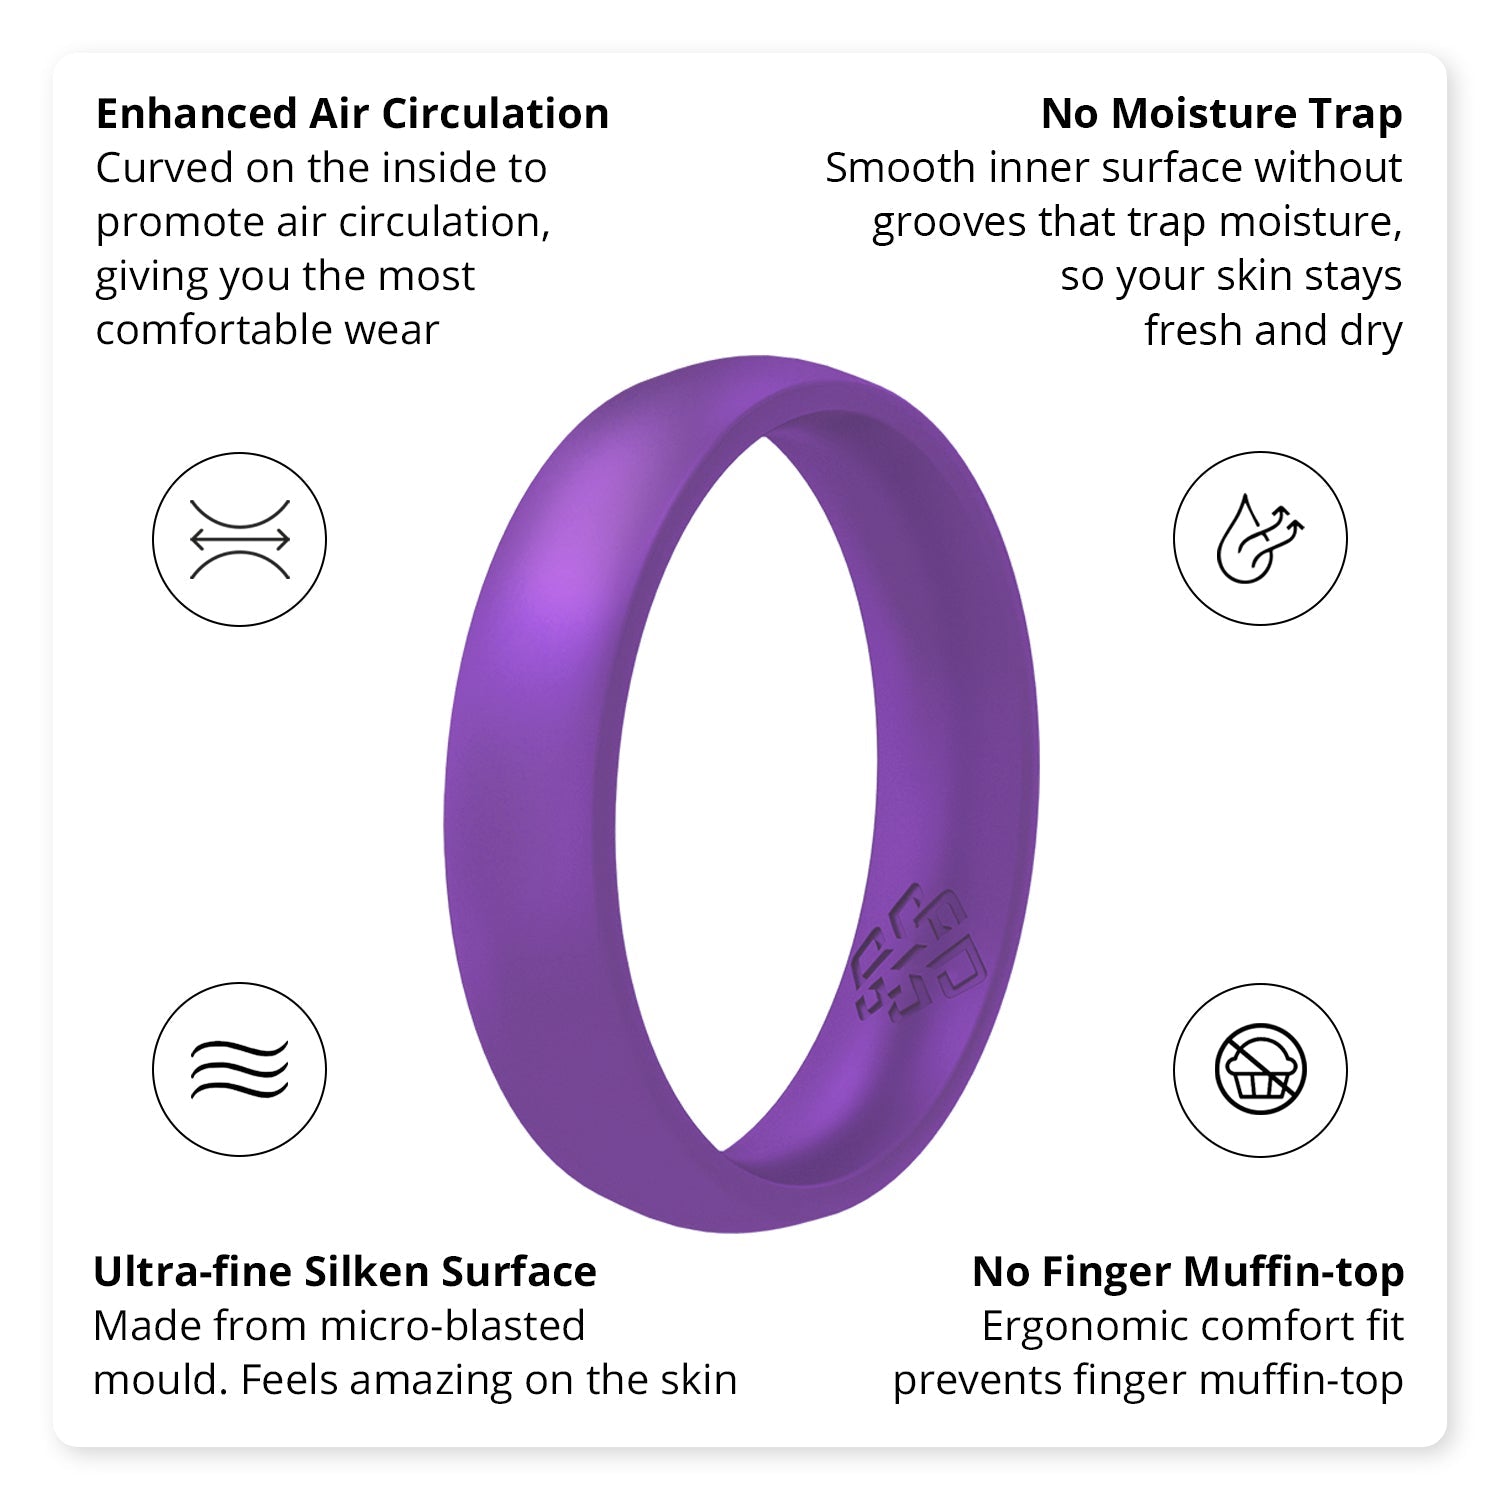 Amethyst Purple Breathable Pearly Silicone Ring for Women - Knot Theory